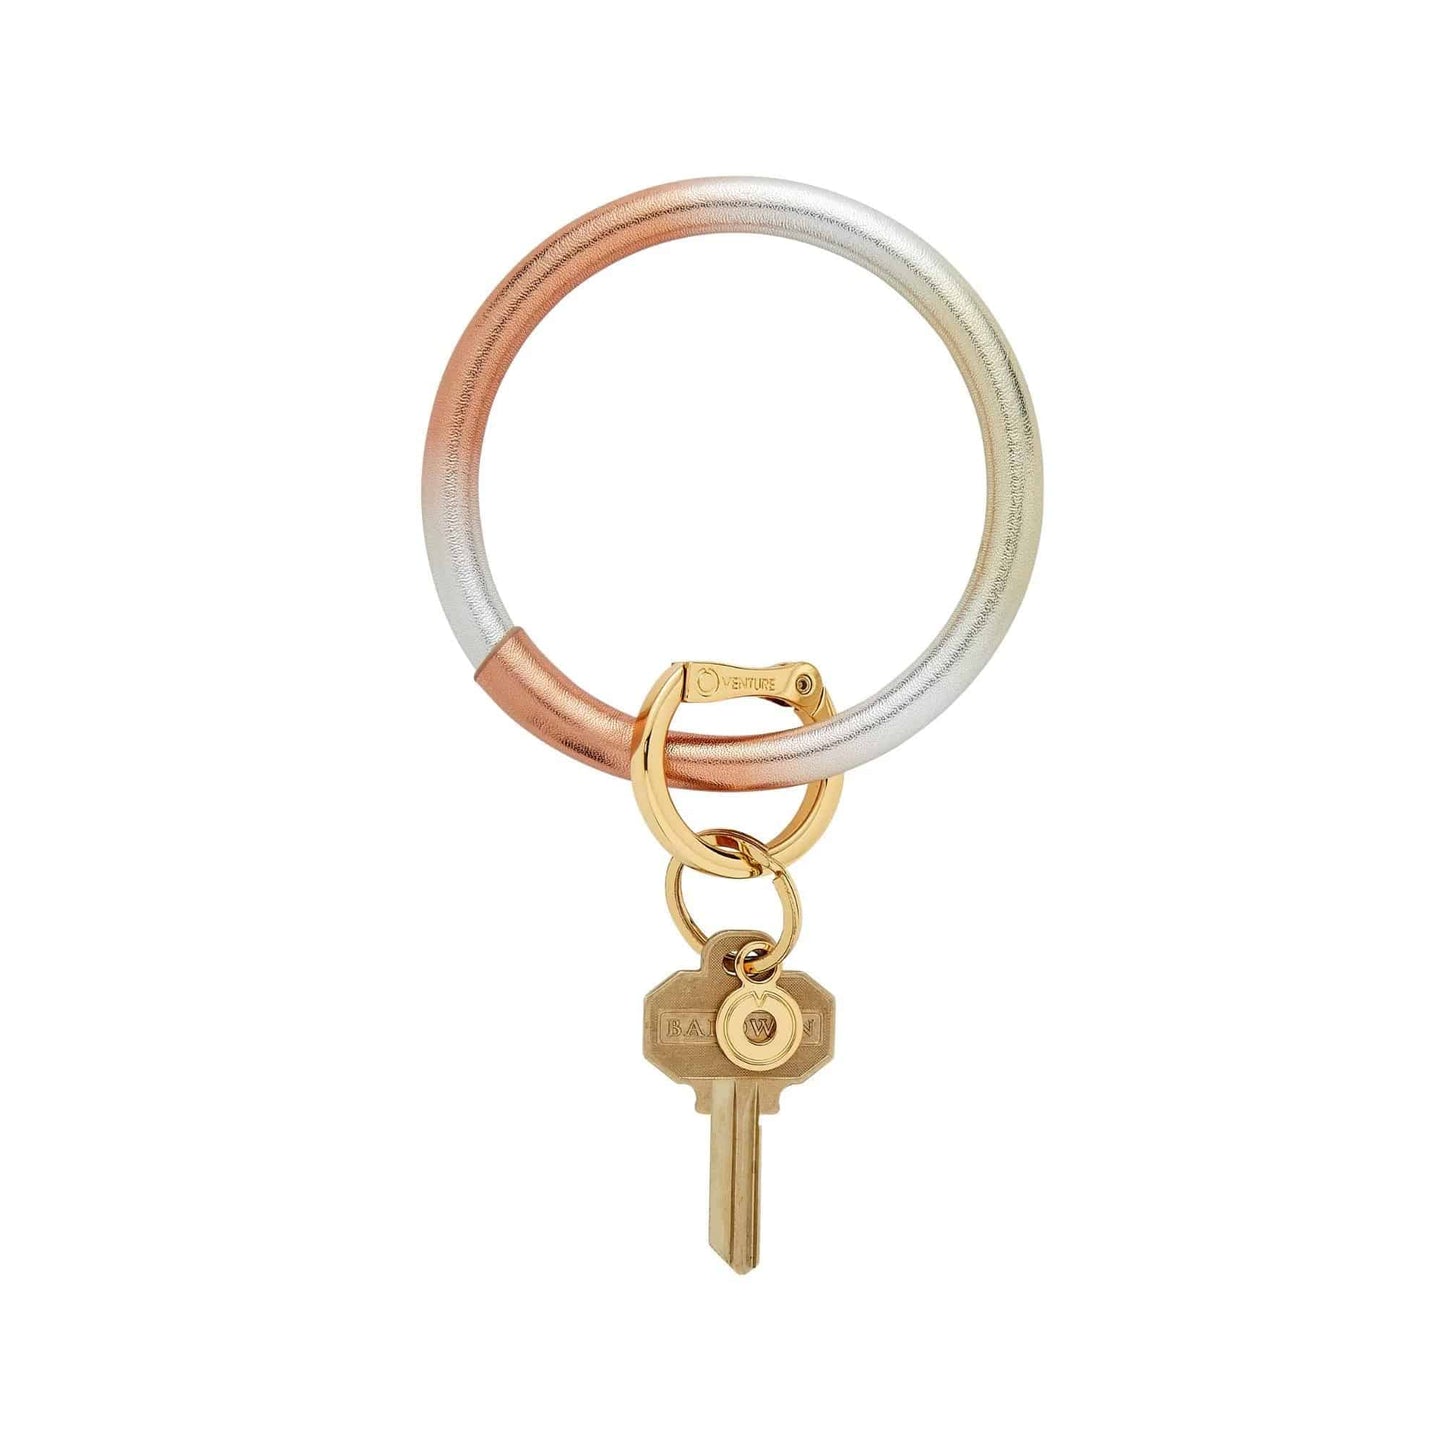 Leather Big O® Key Ring - Ombré Mixed Metal - Findlay Rowe Designs